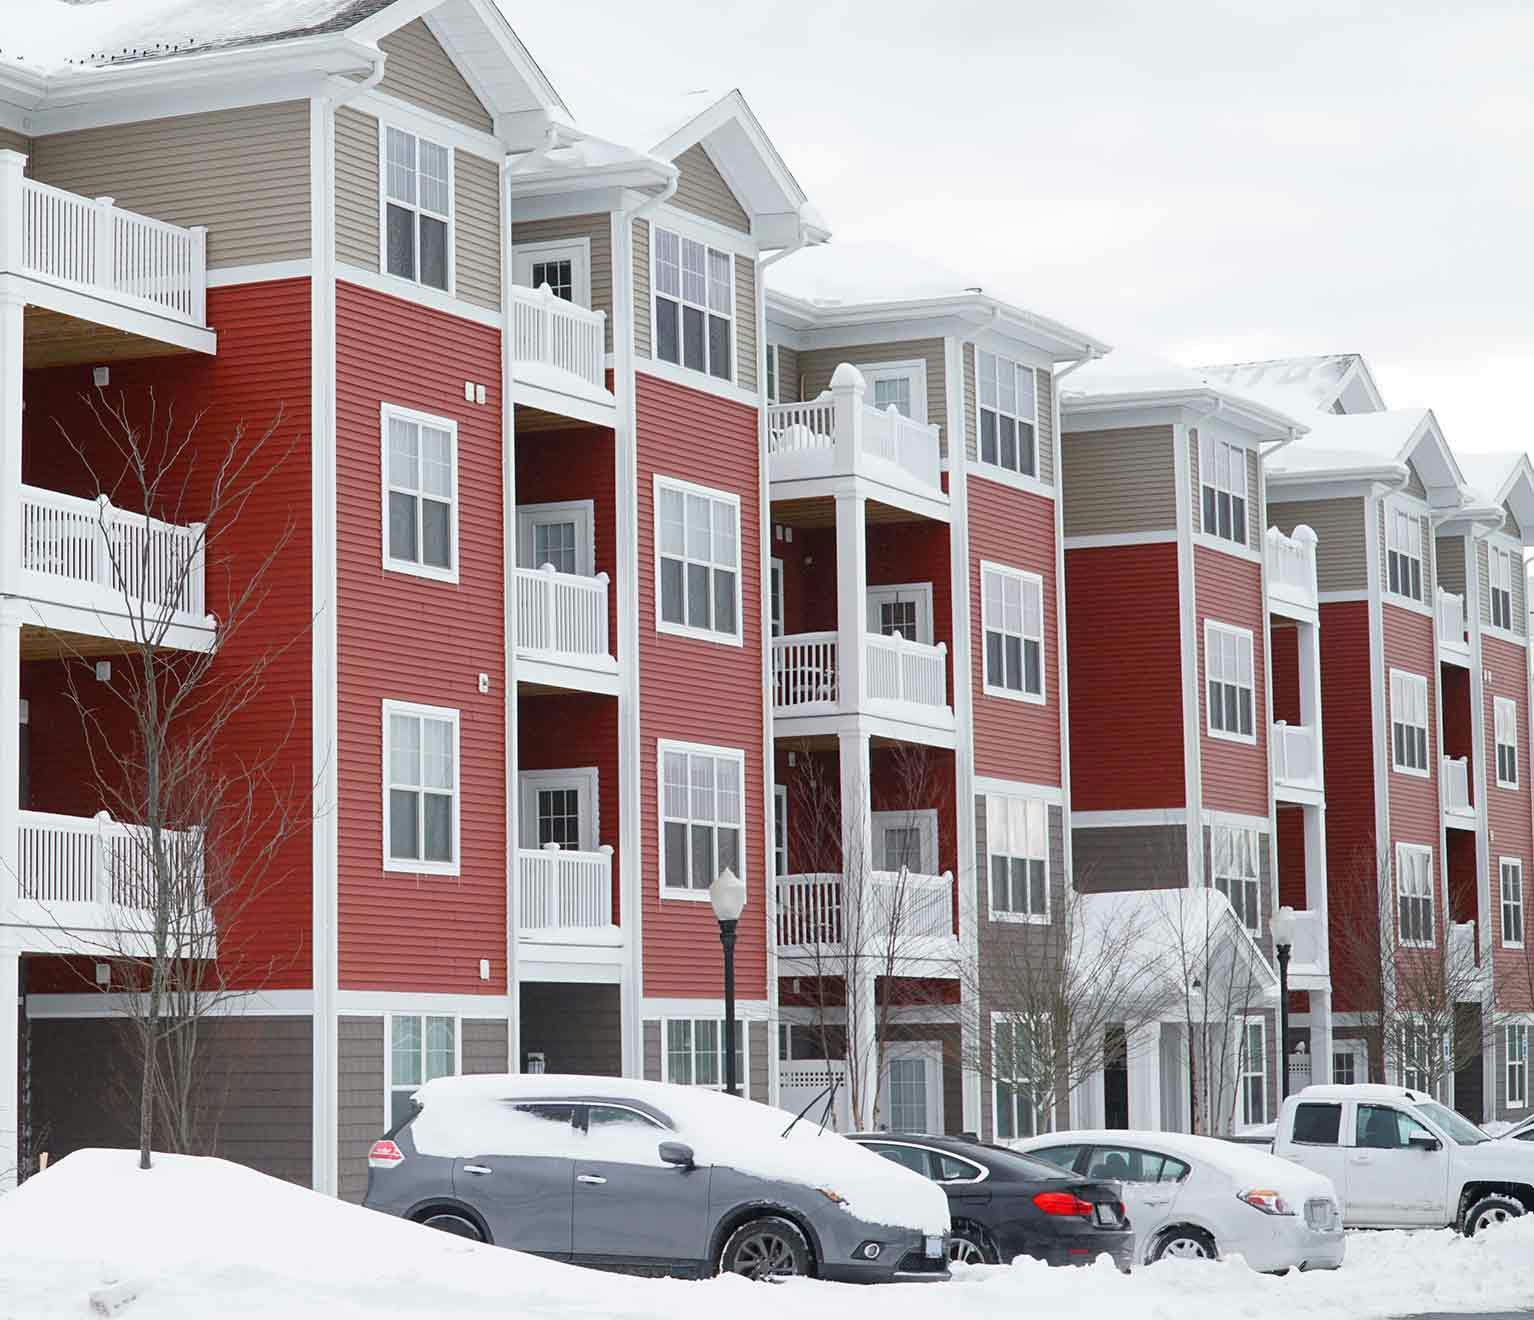 Red and tan apartment complex in winter with snow on roof.